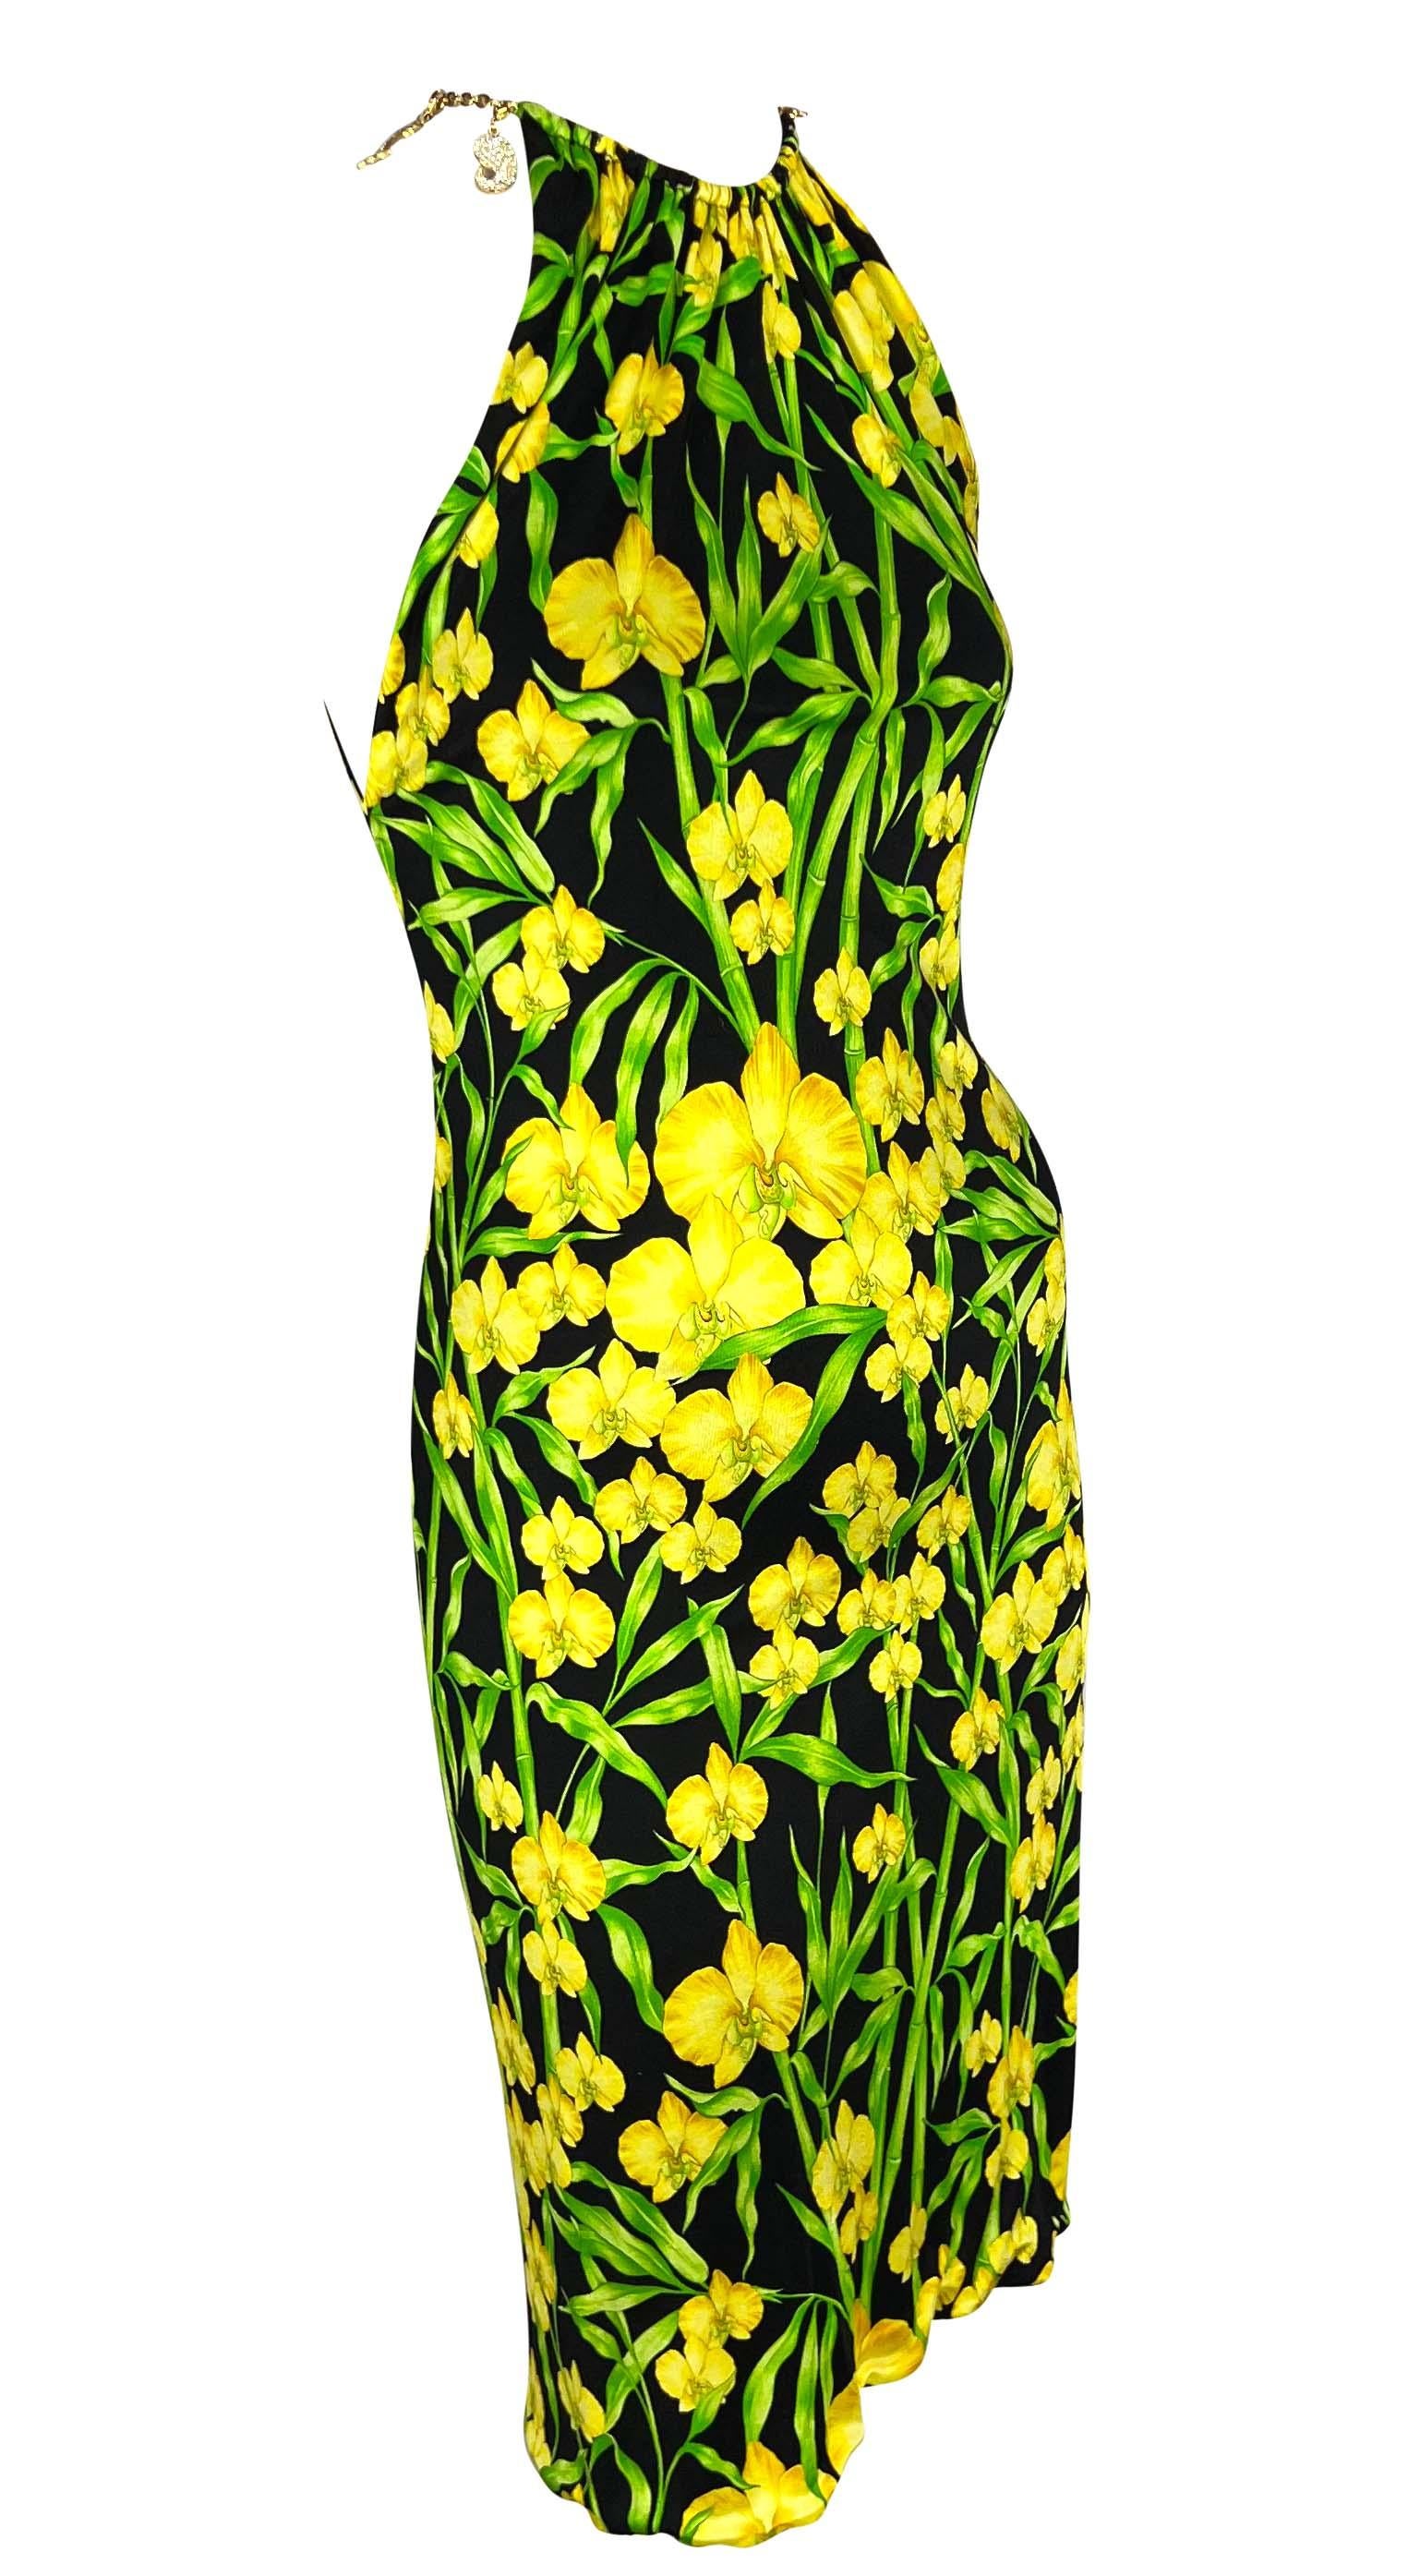 S/S 2000 Gianni Versace by Donatella Jungle Yellow Orchid Stretch Charm Dress For Sale 1